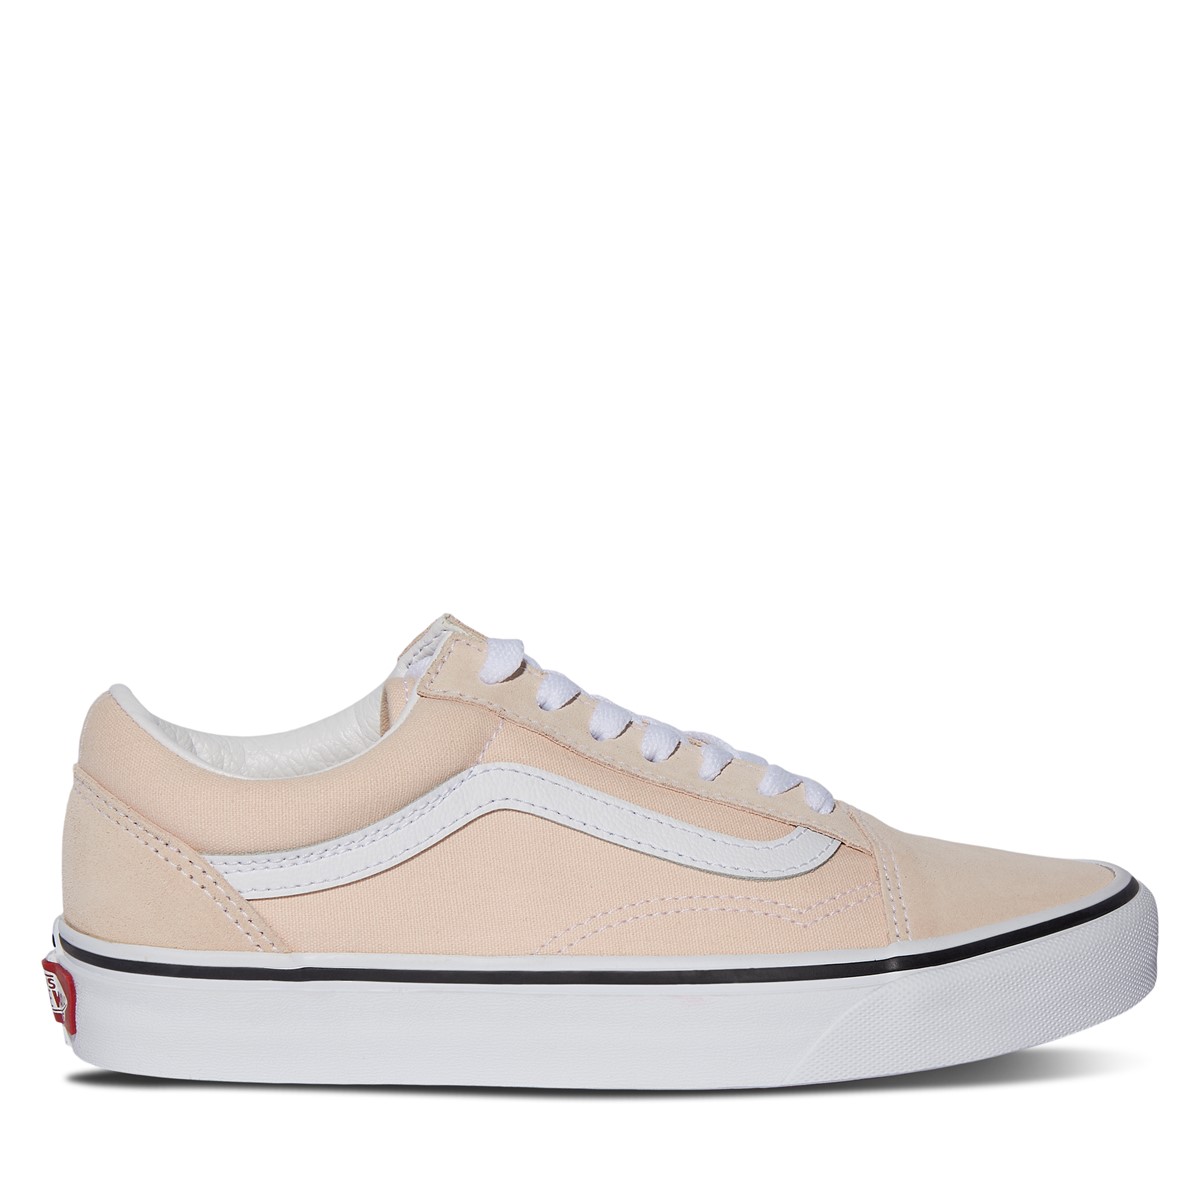 Baskets Old Skool pêche et blanches